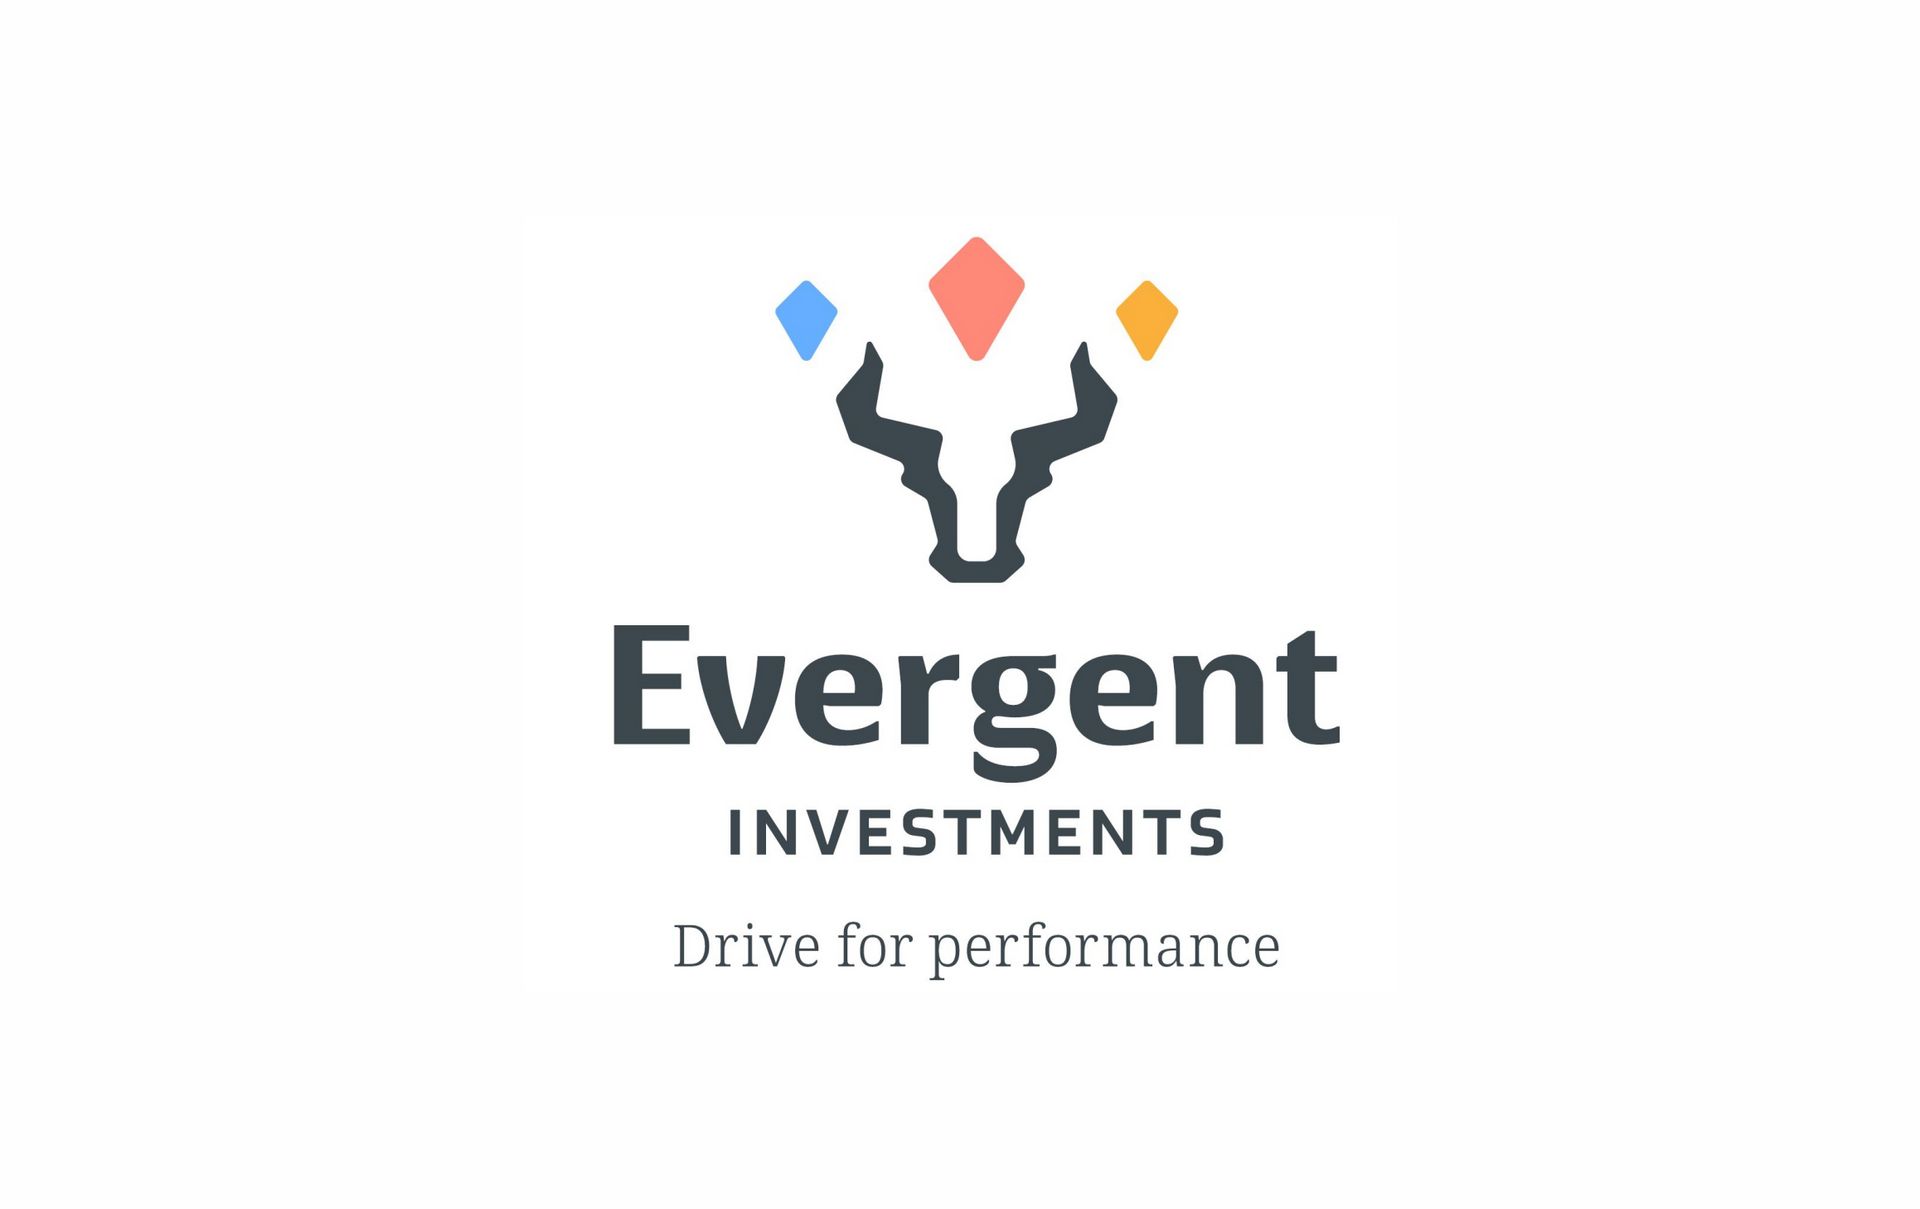 Authorization of the amendments of the Memorandum of Association regarding the change of the company name to “EVERGENT INVESTMENTS” S.A